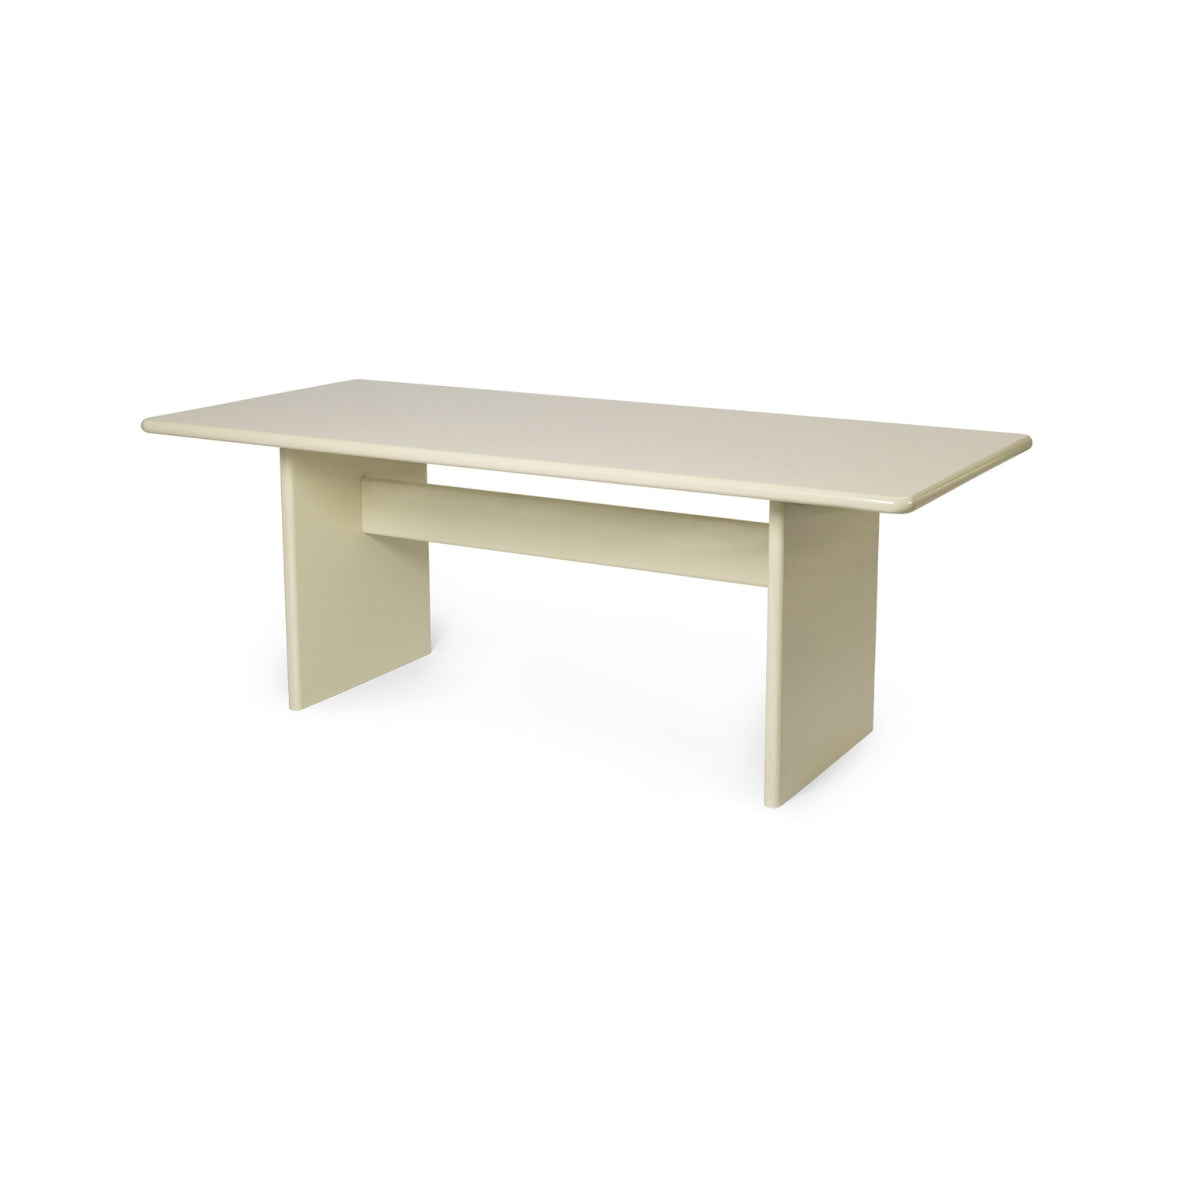 ferm LIVING Rink Dining Table. Free UK delivery at someday designs #size_small